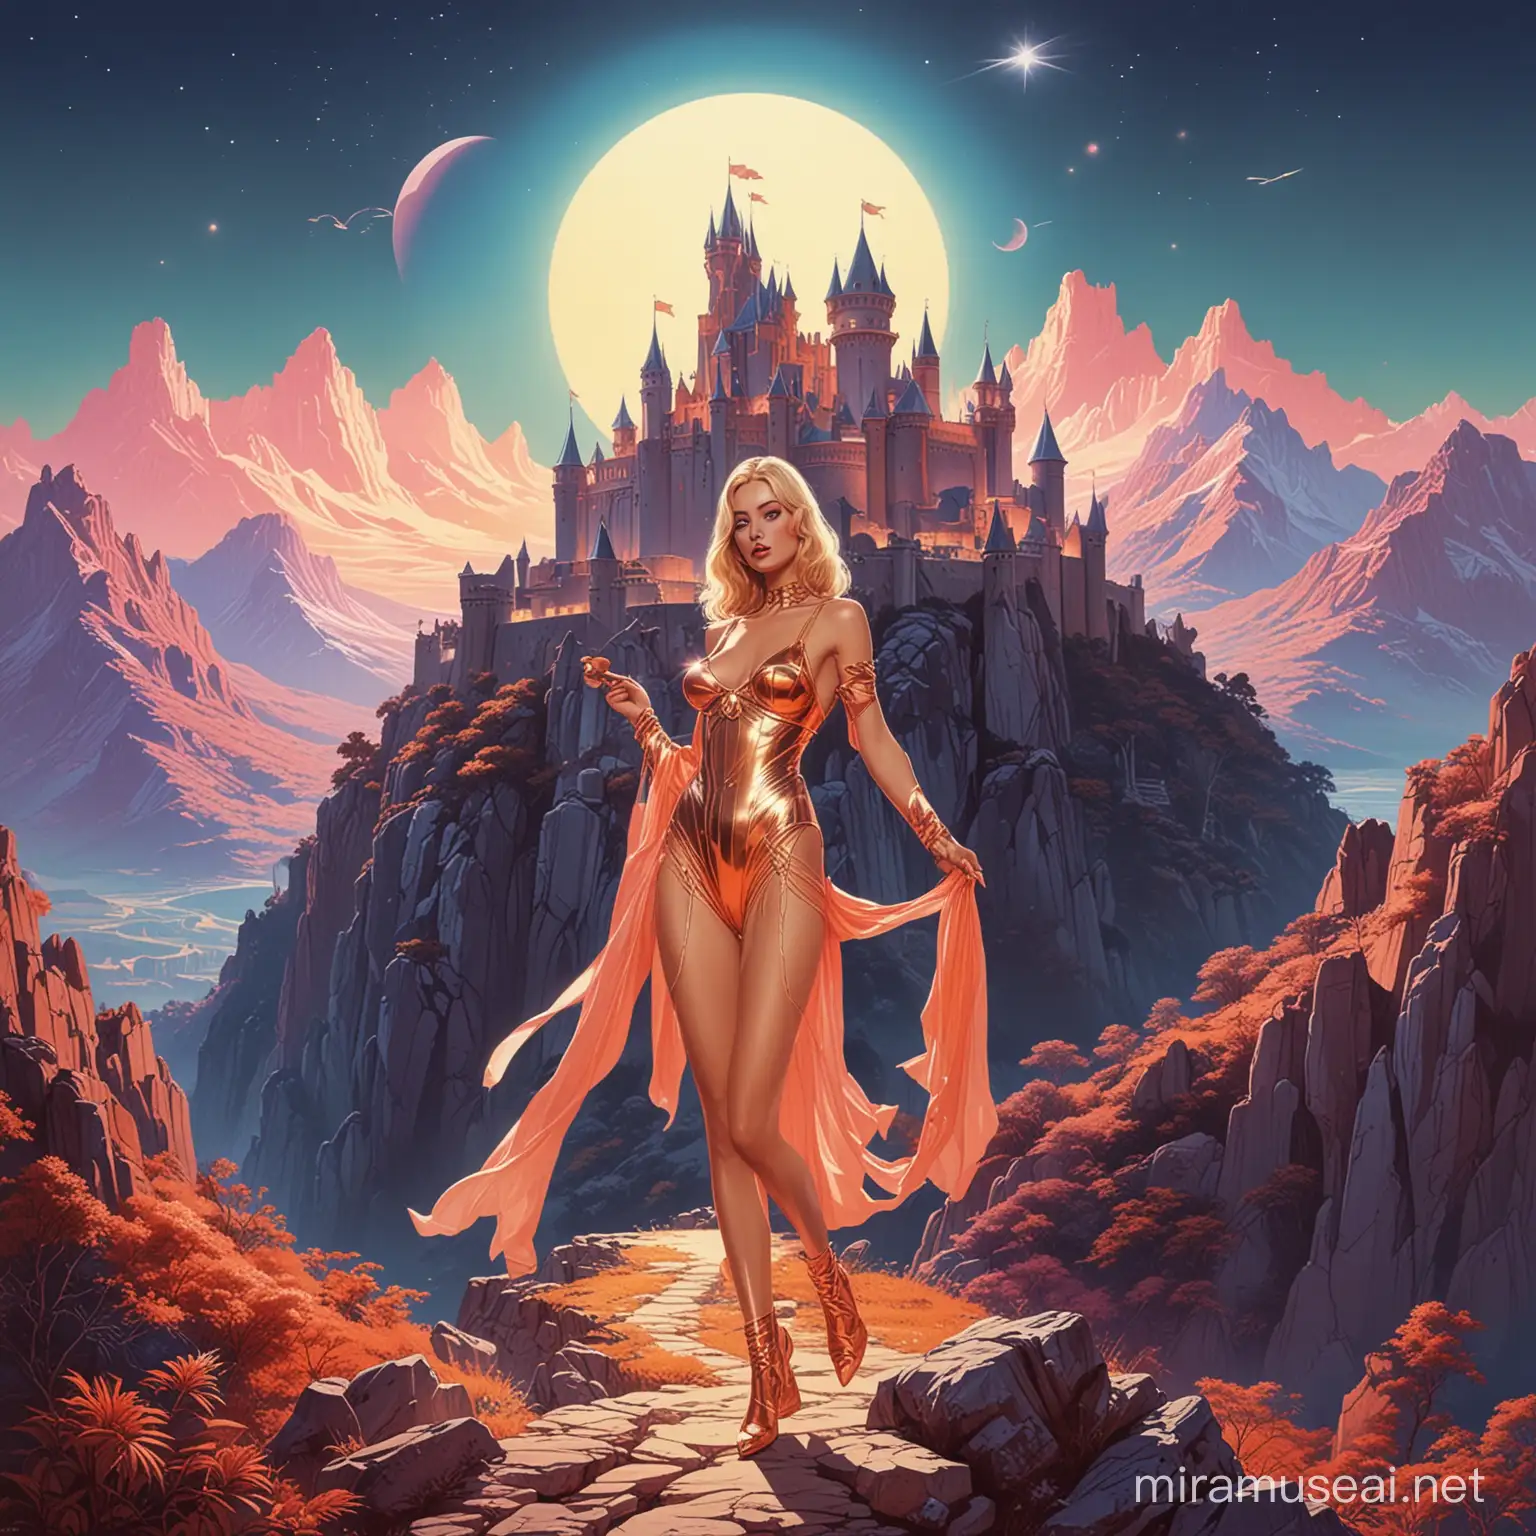 In a disco outfit, vintage poster of an ancient medieval castle in the mountains, in the style of Hajime Sorayama and Roger Dean, surreal moonlight, bright colors, collage style